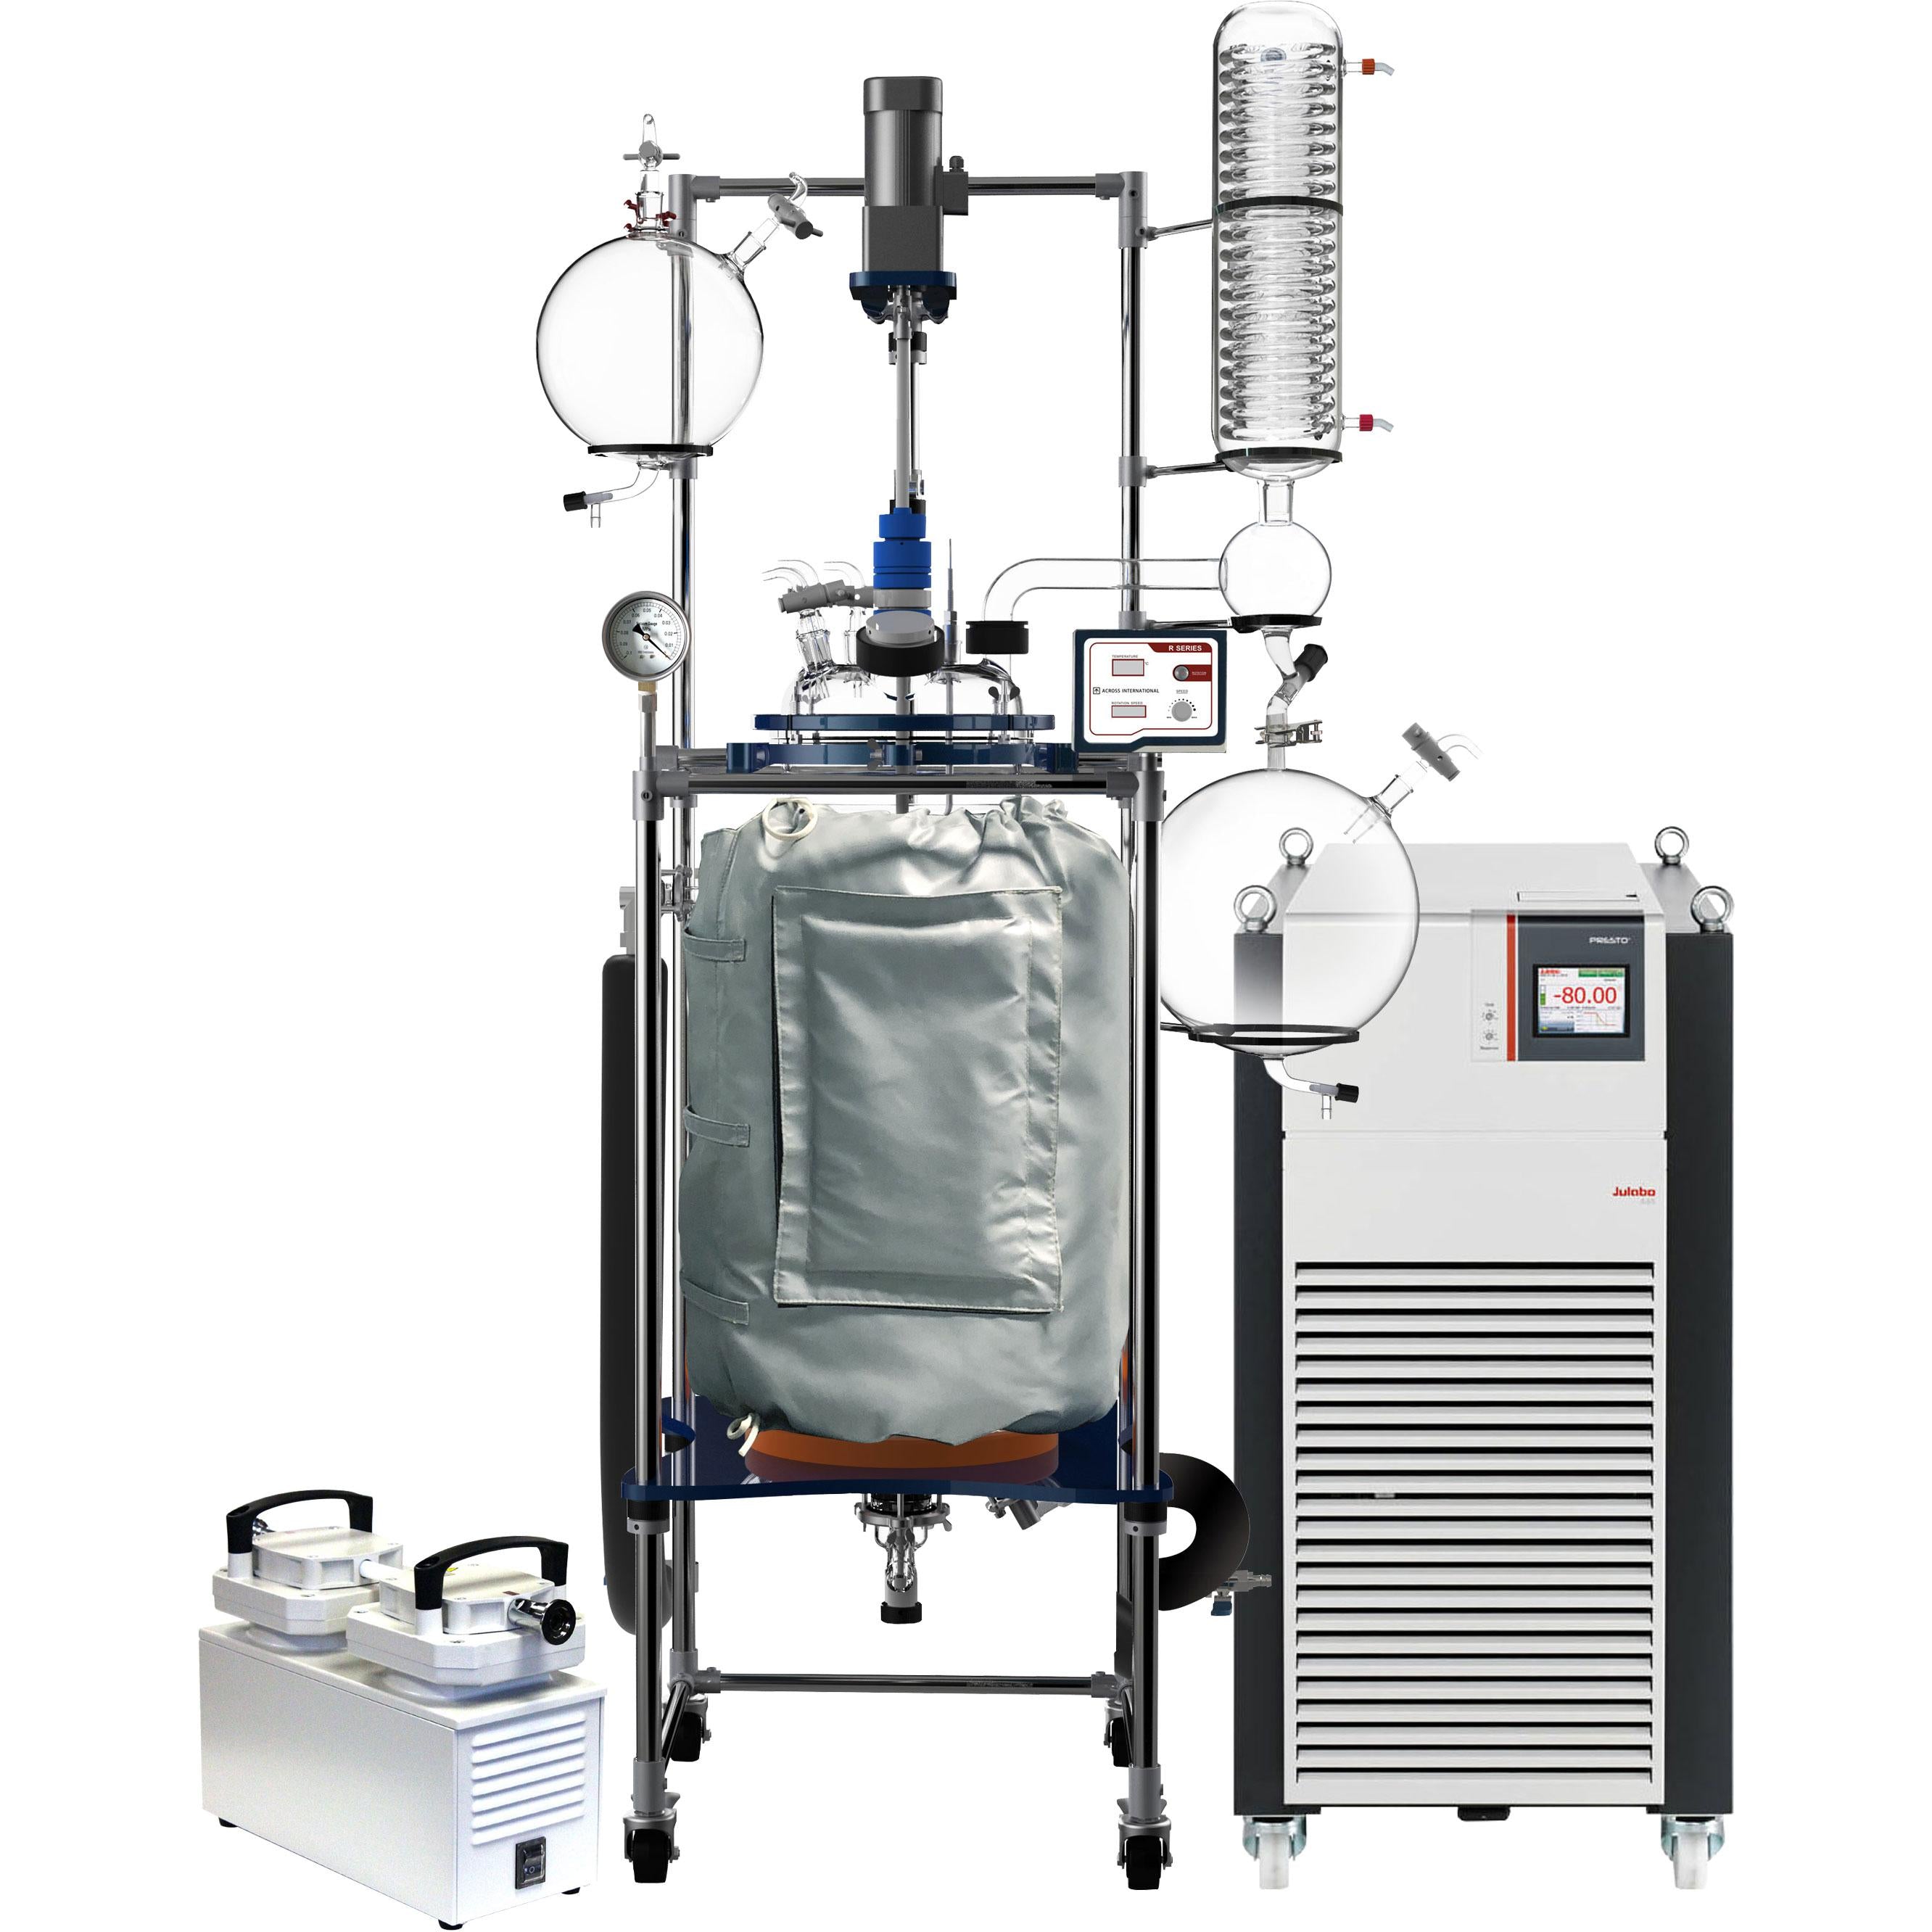 Ai R Series Turnkey Single Jacketed Glass Reactor Kits, 100 Liter, with Chiller & Pump